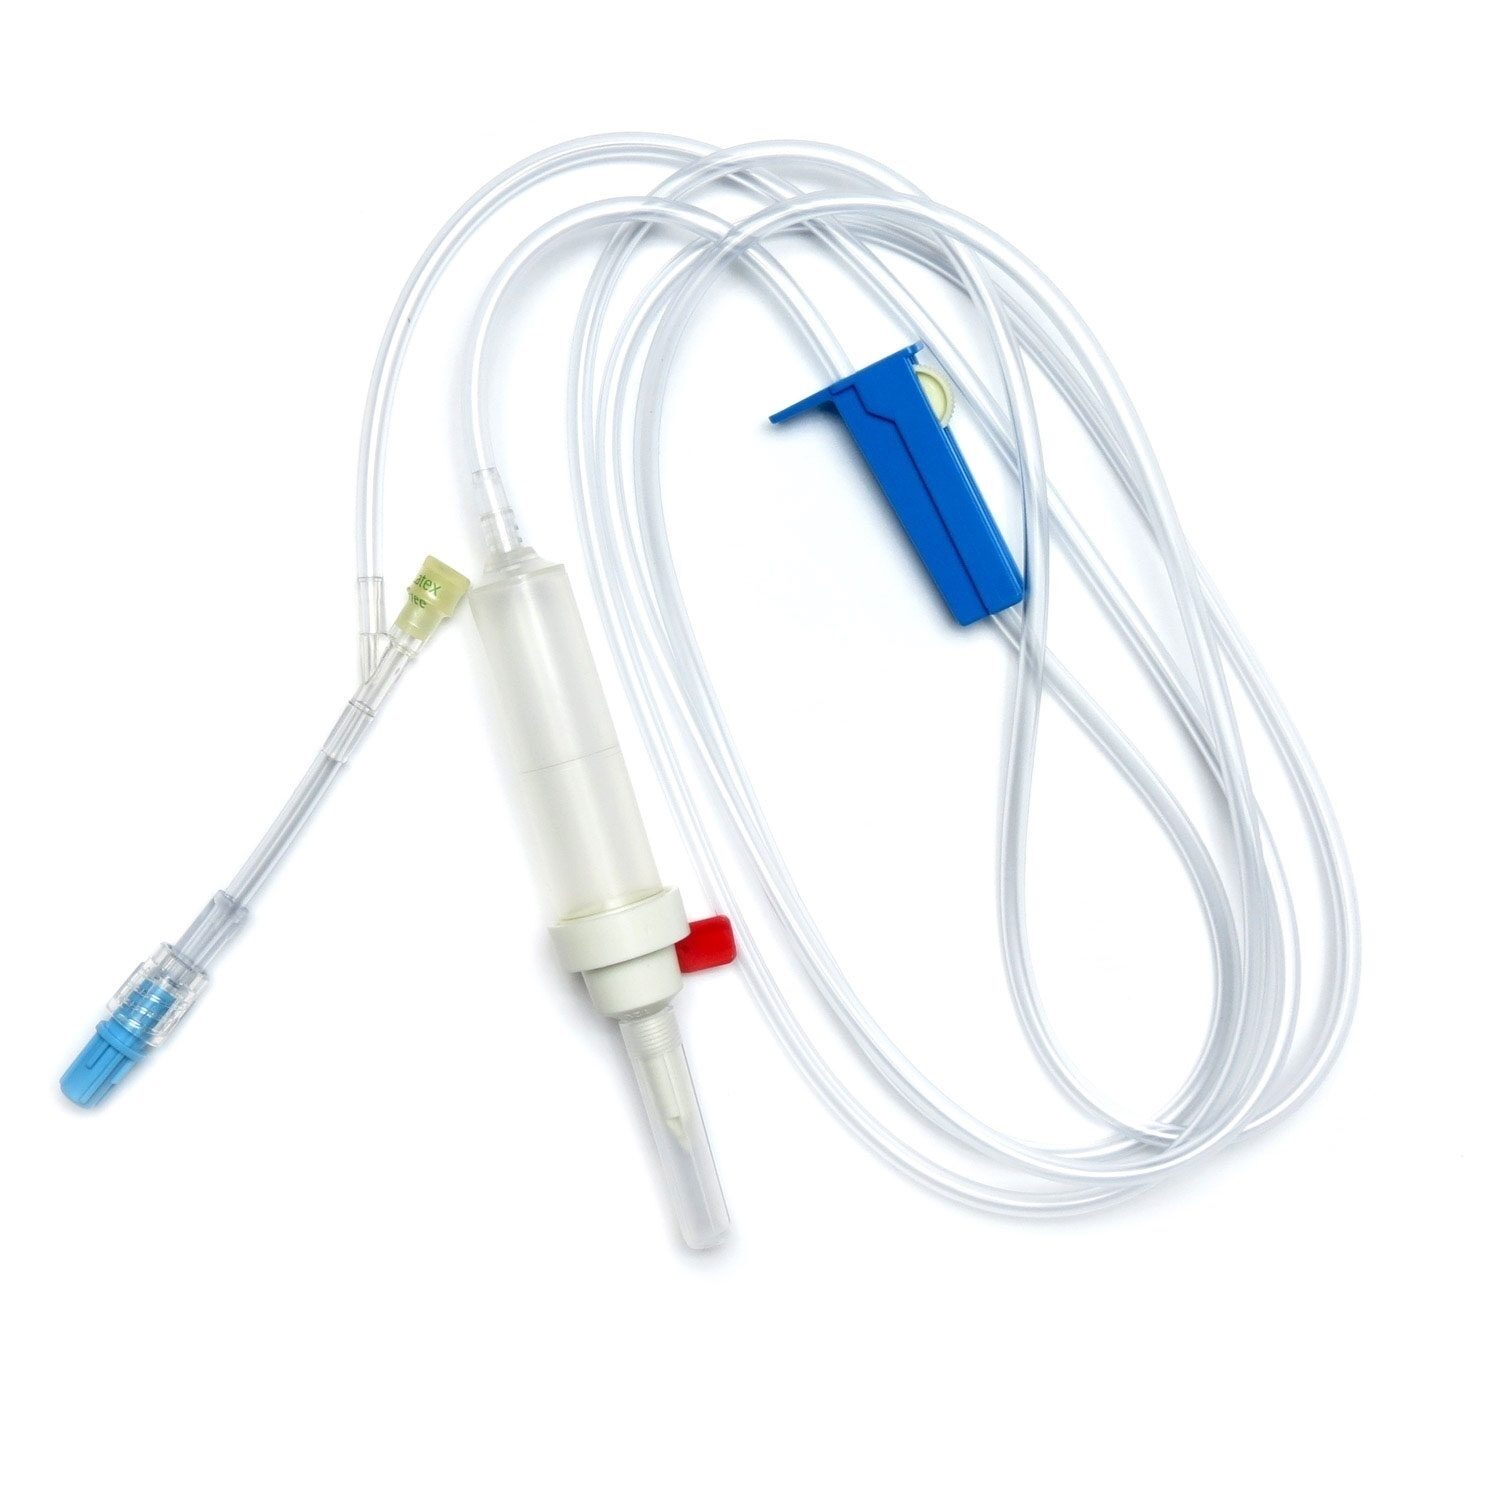 IV Administration Set, 15 Micron Filter, 20 drops/mL, 1 Y-Site